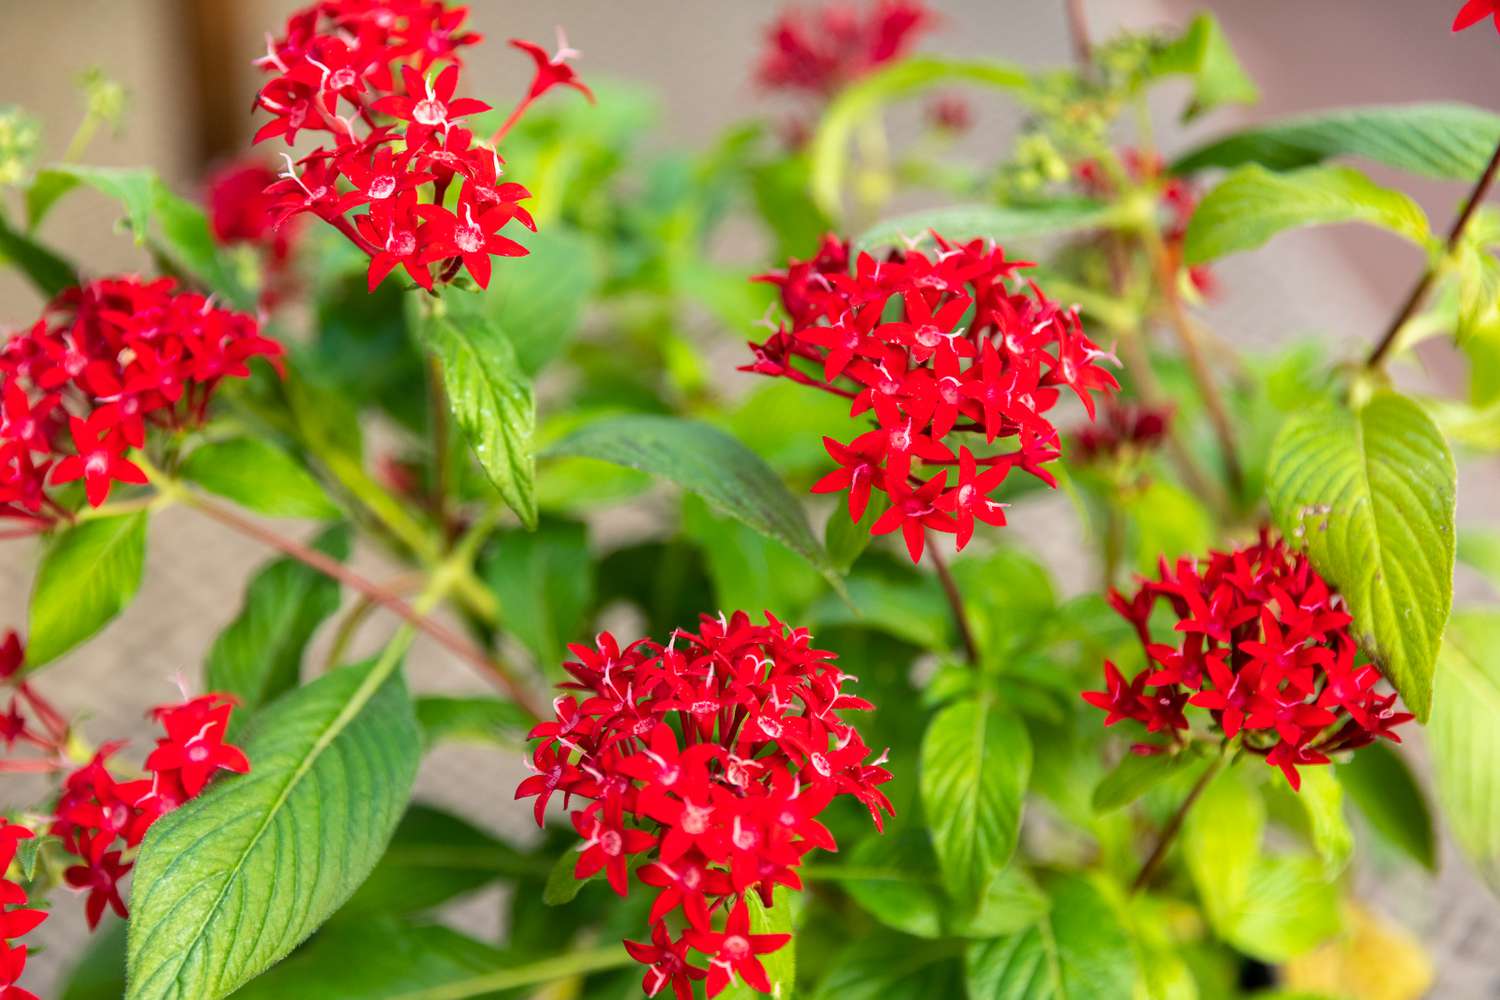 Red flowers used to attract hummingbirds